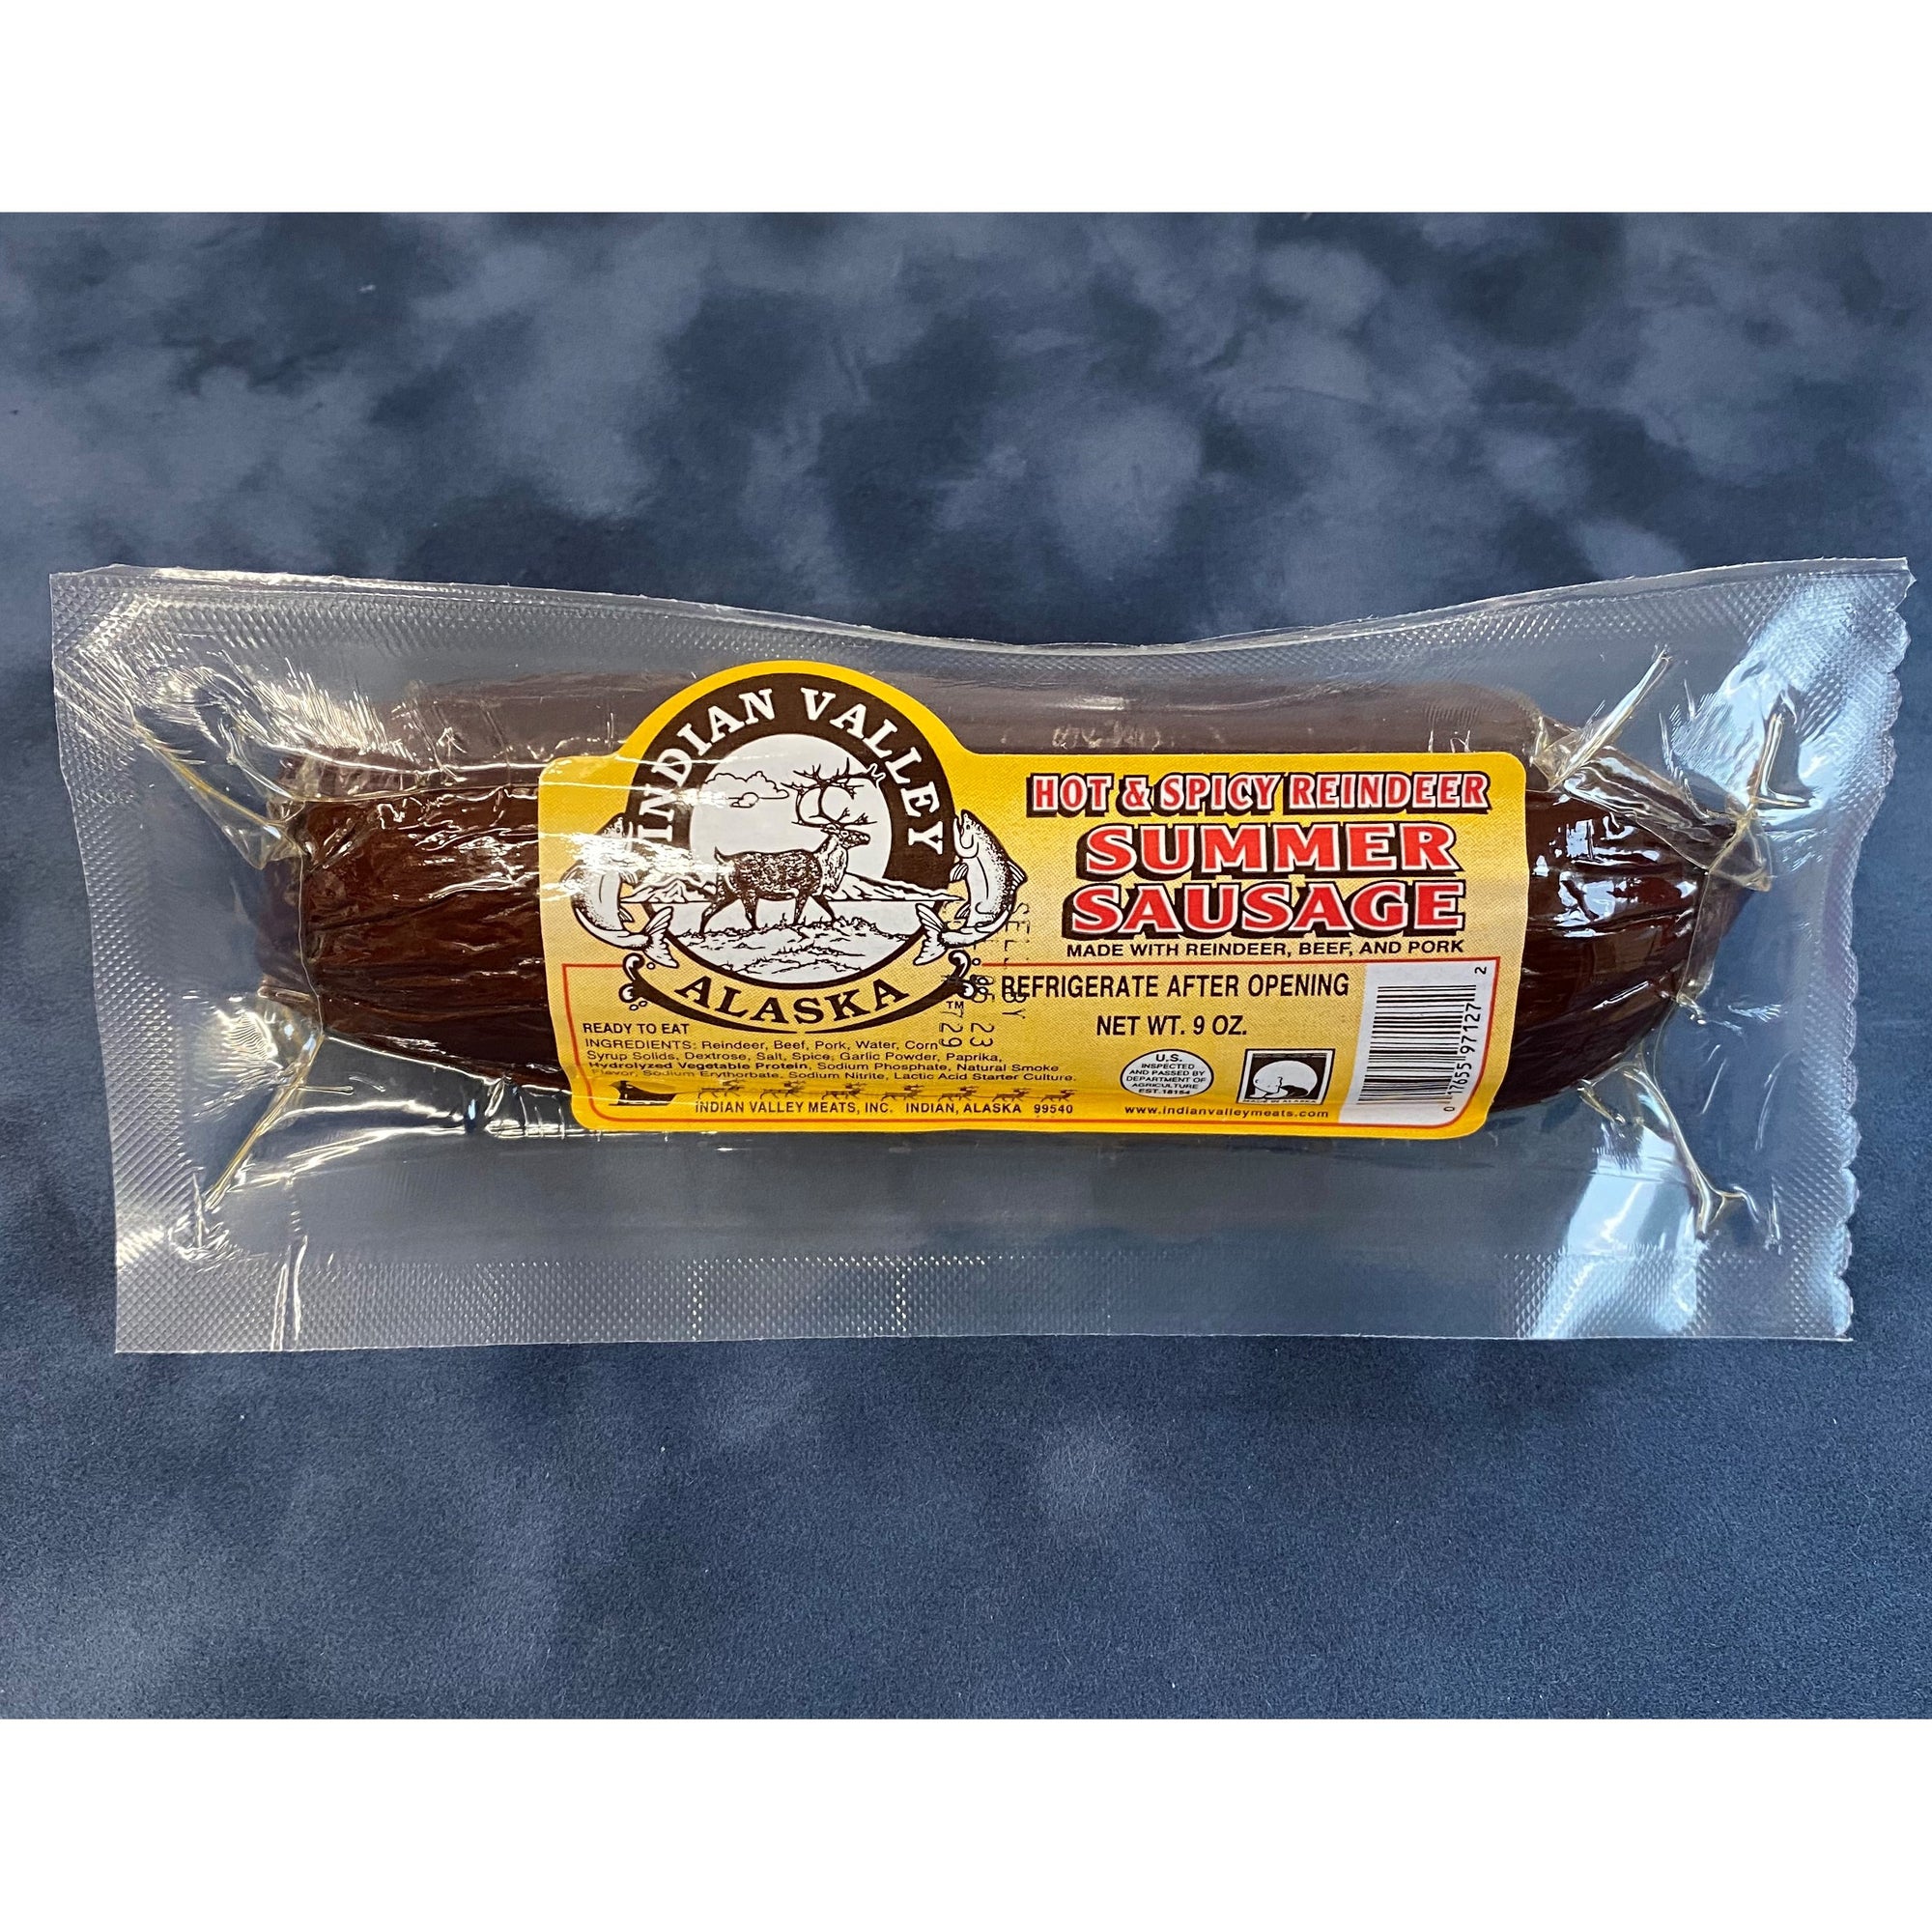 Hot and Spicy Reindeer Summer Sausage